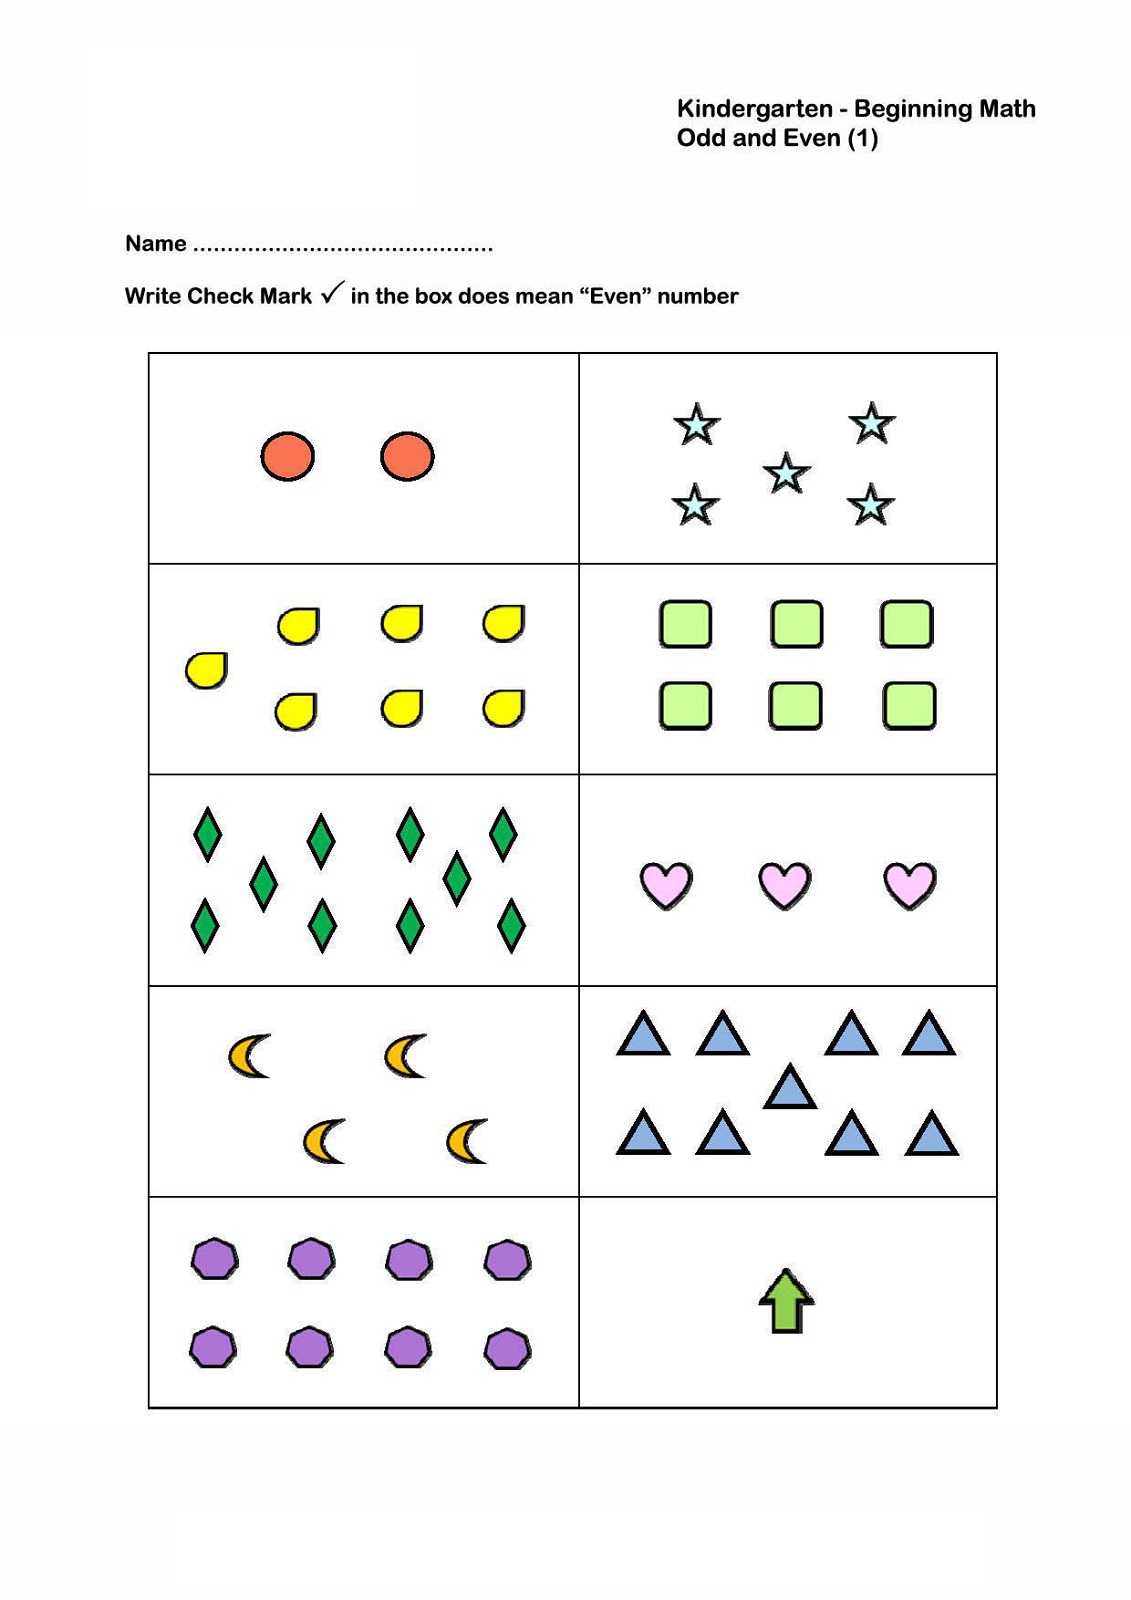 discover-even-numbers-free-worksheet-by-skoolgo-odd-and-even-numbers-worksheets-activity